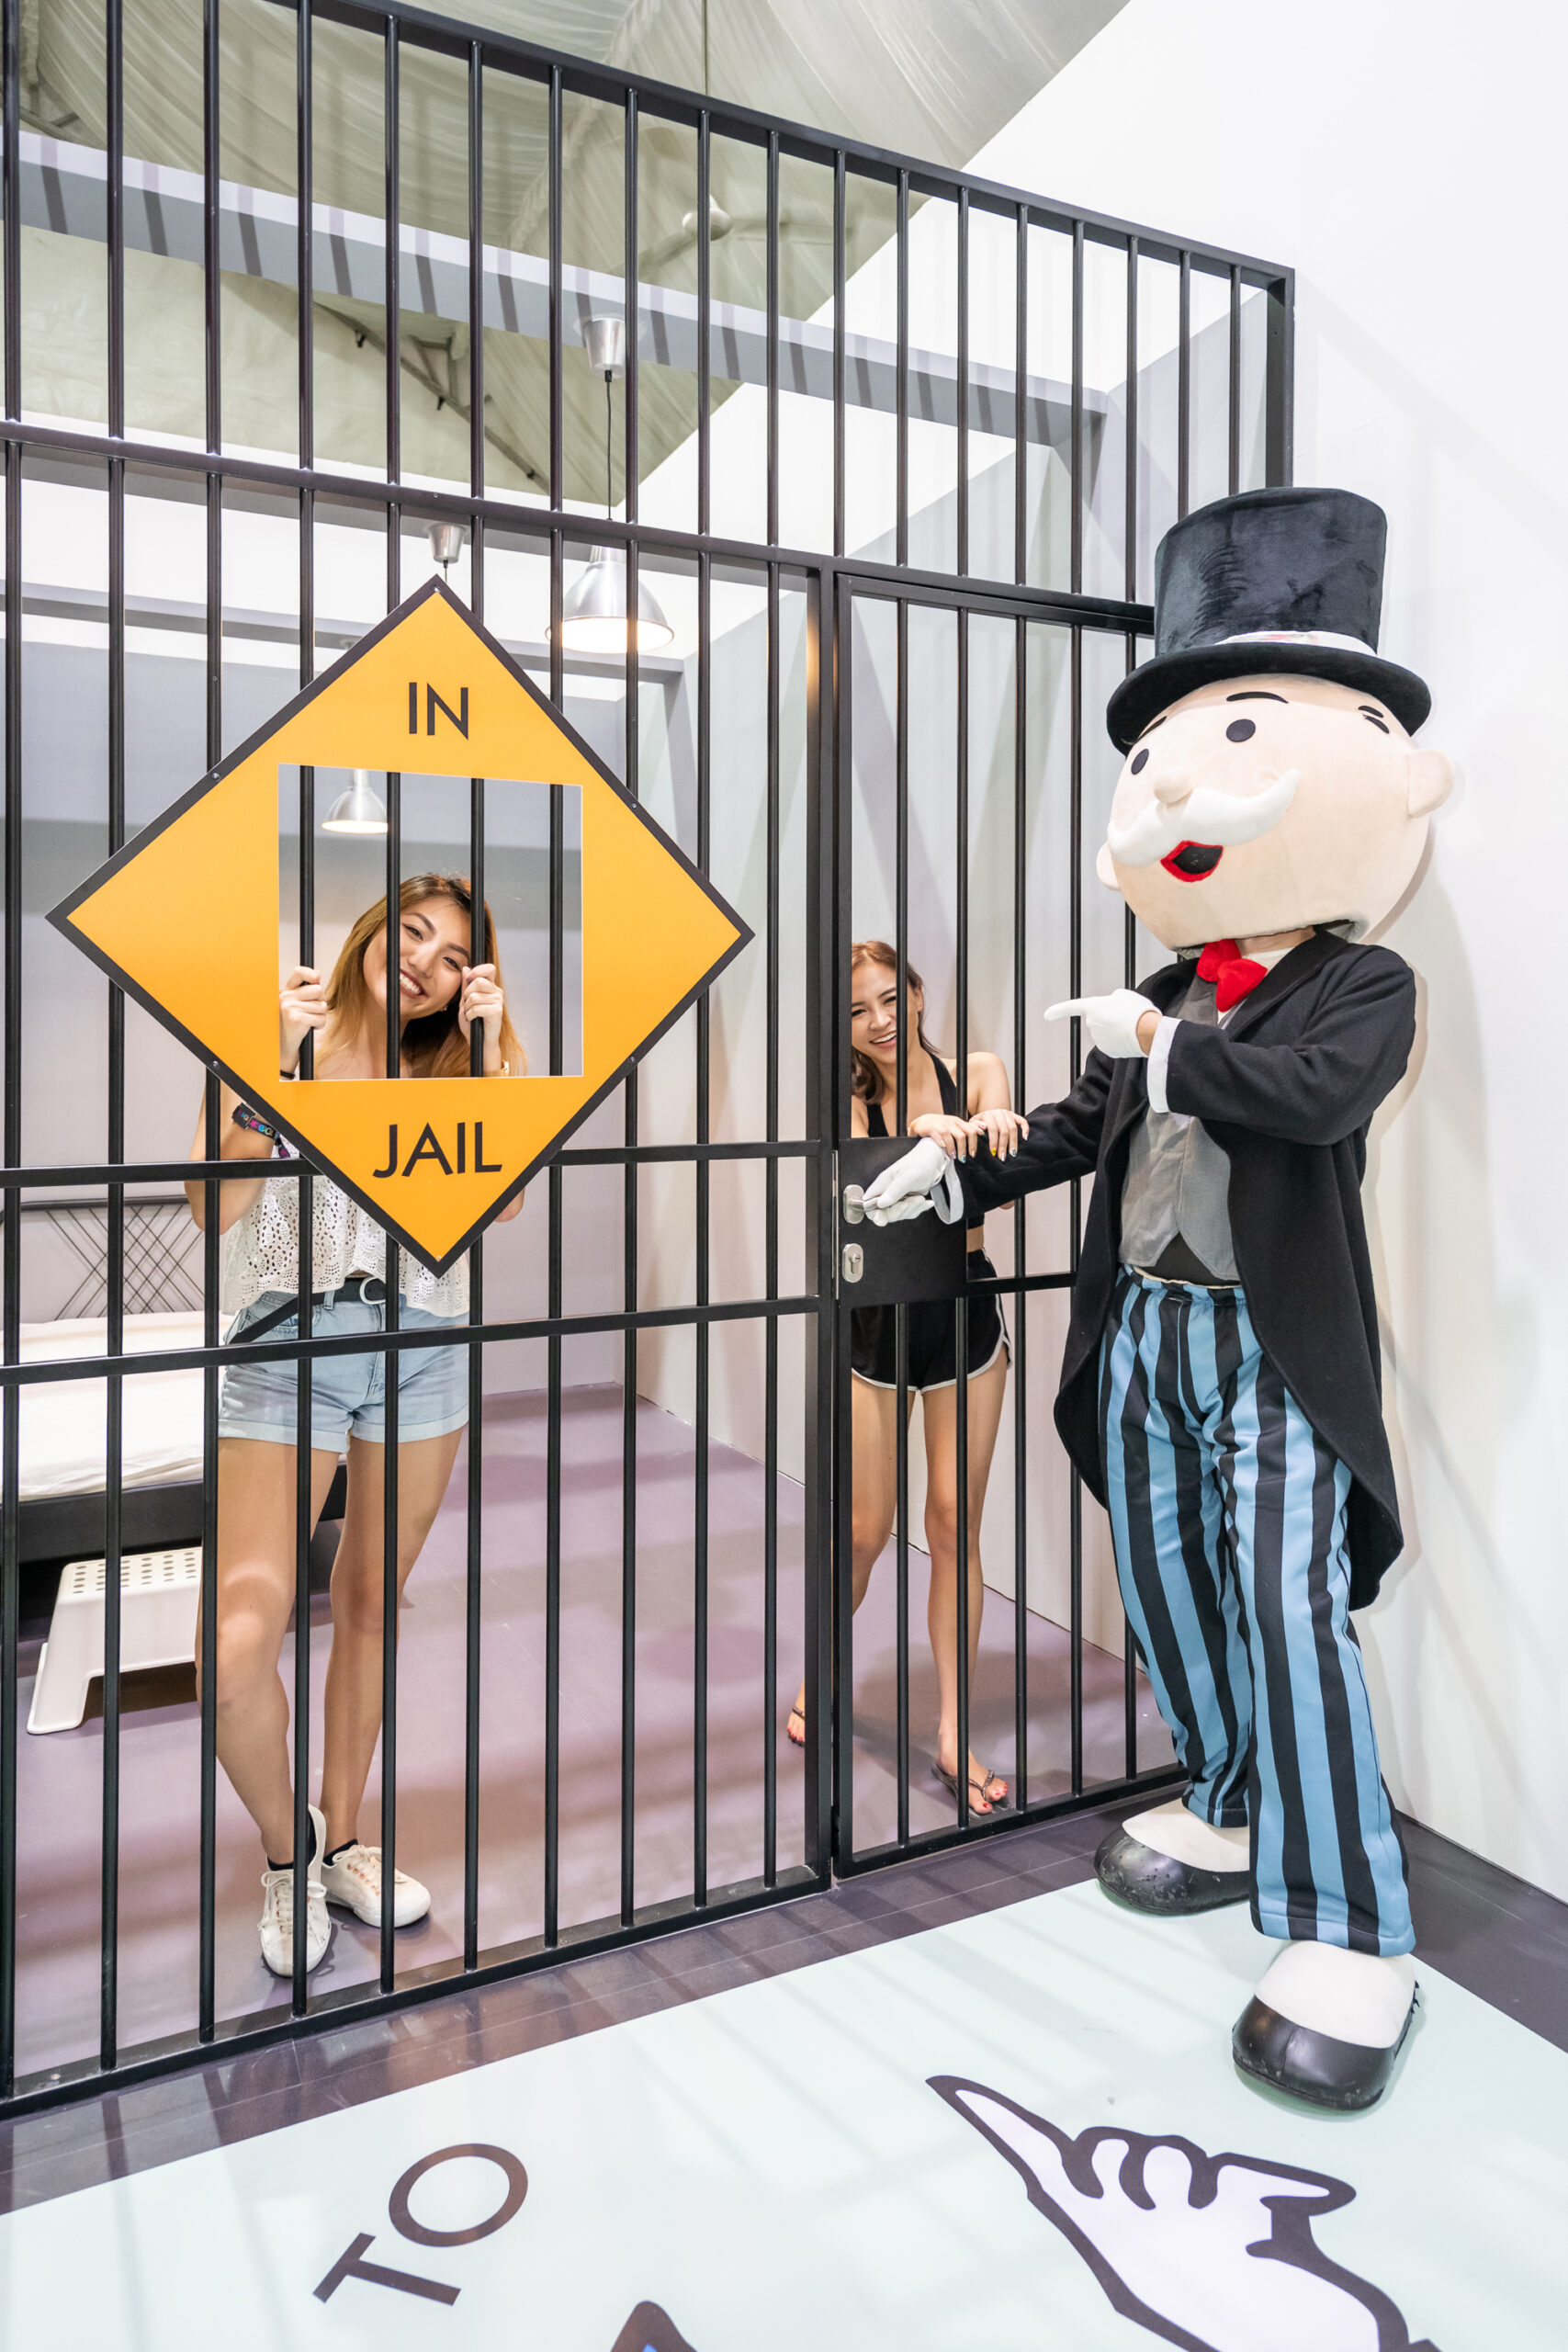 Monopoly game bring to iconic 'GO TO JAIL' act to live